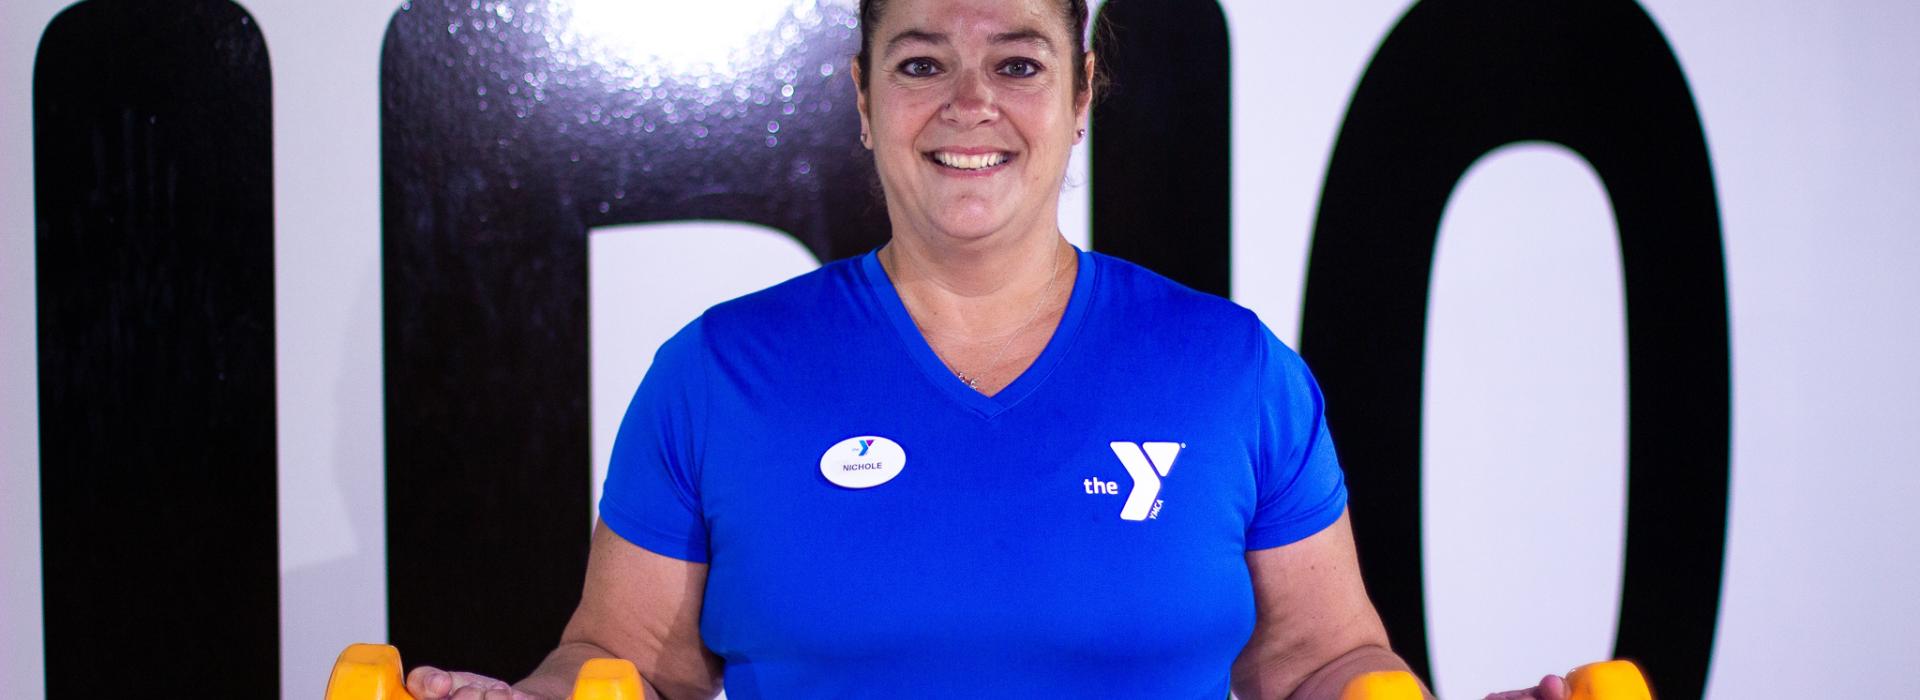 Nichole, Personal Trainer at the YMCA of Greater Brandywine, is ready to help support your strength goals.